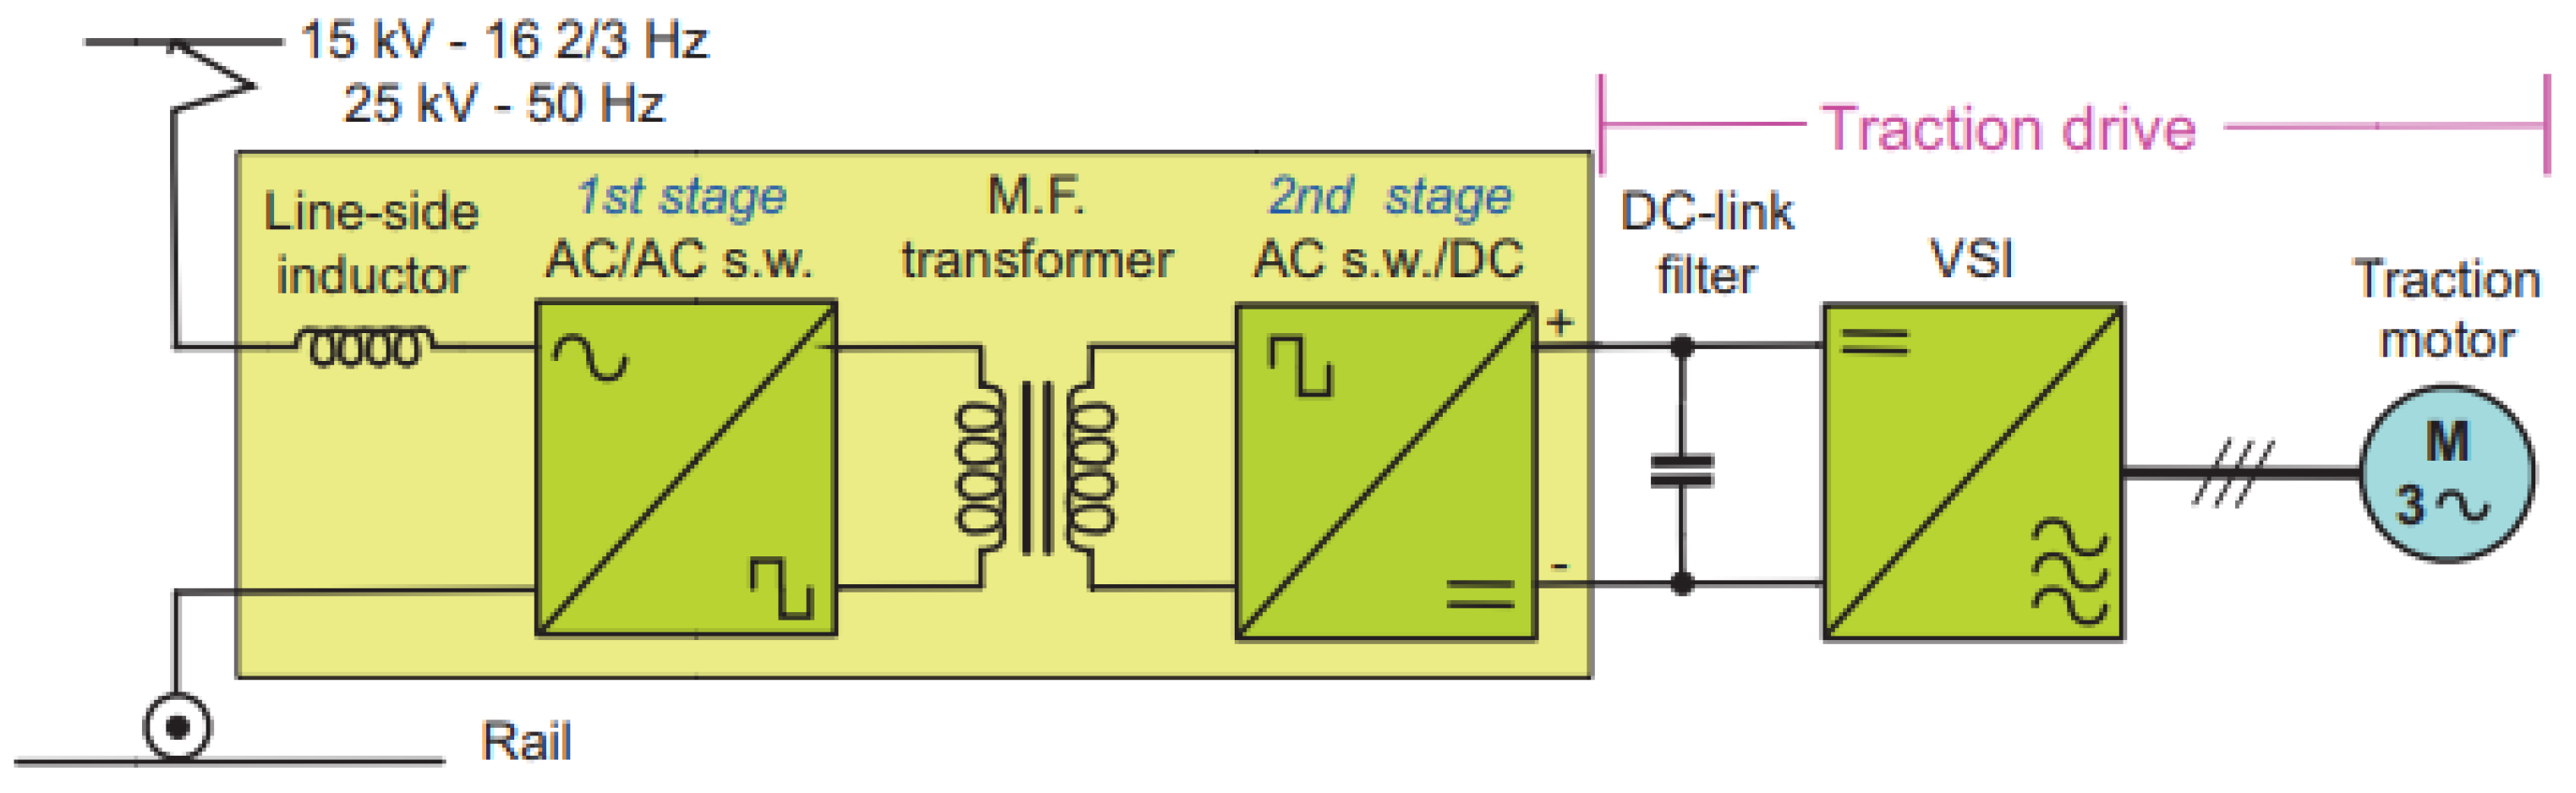 Are model train transformers ac or dc?